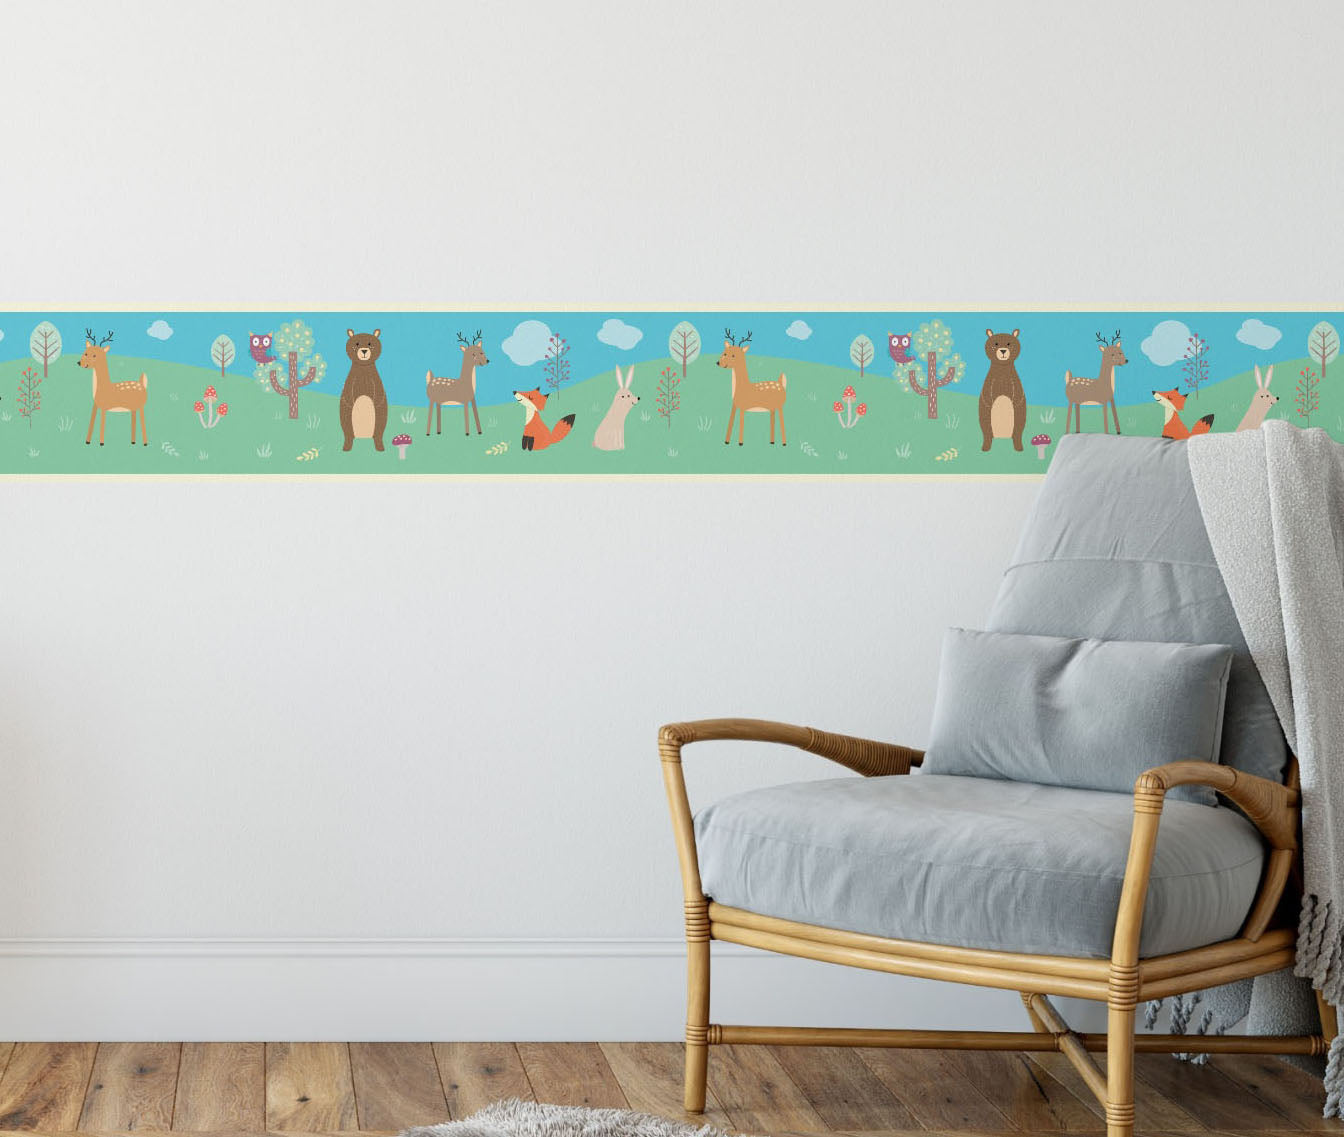 GB90031g8 Forest Animals Peel and Stick Wallpaper Border 8in Height x 18ft Long Blue/Green/Tan